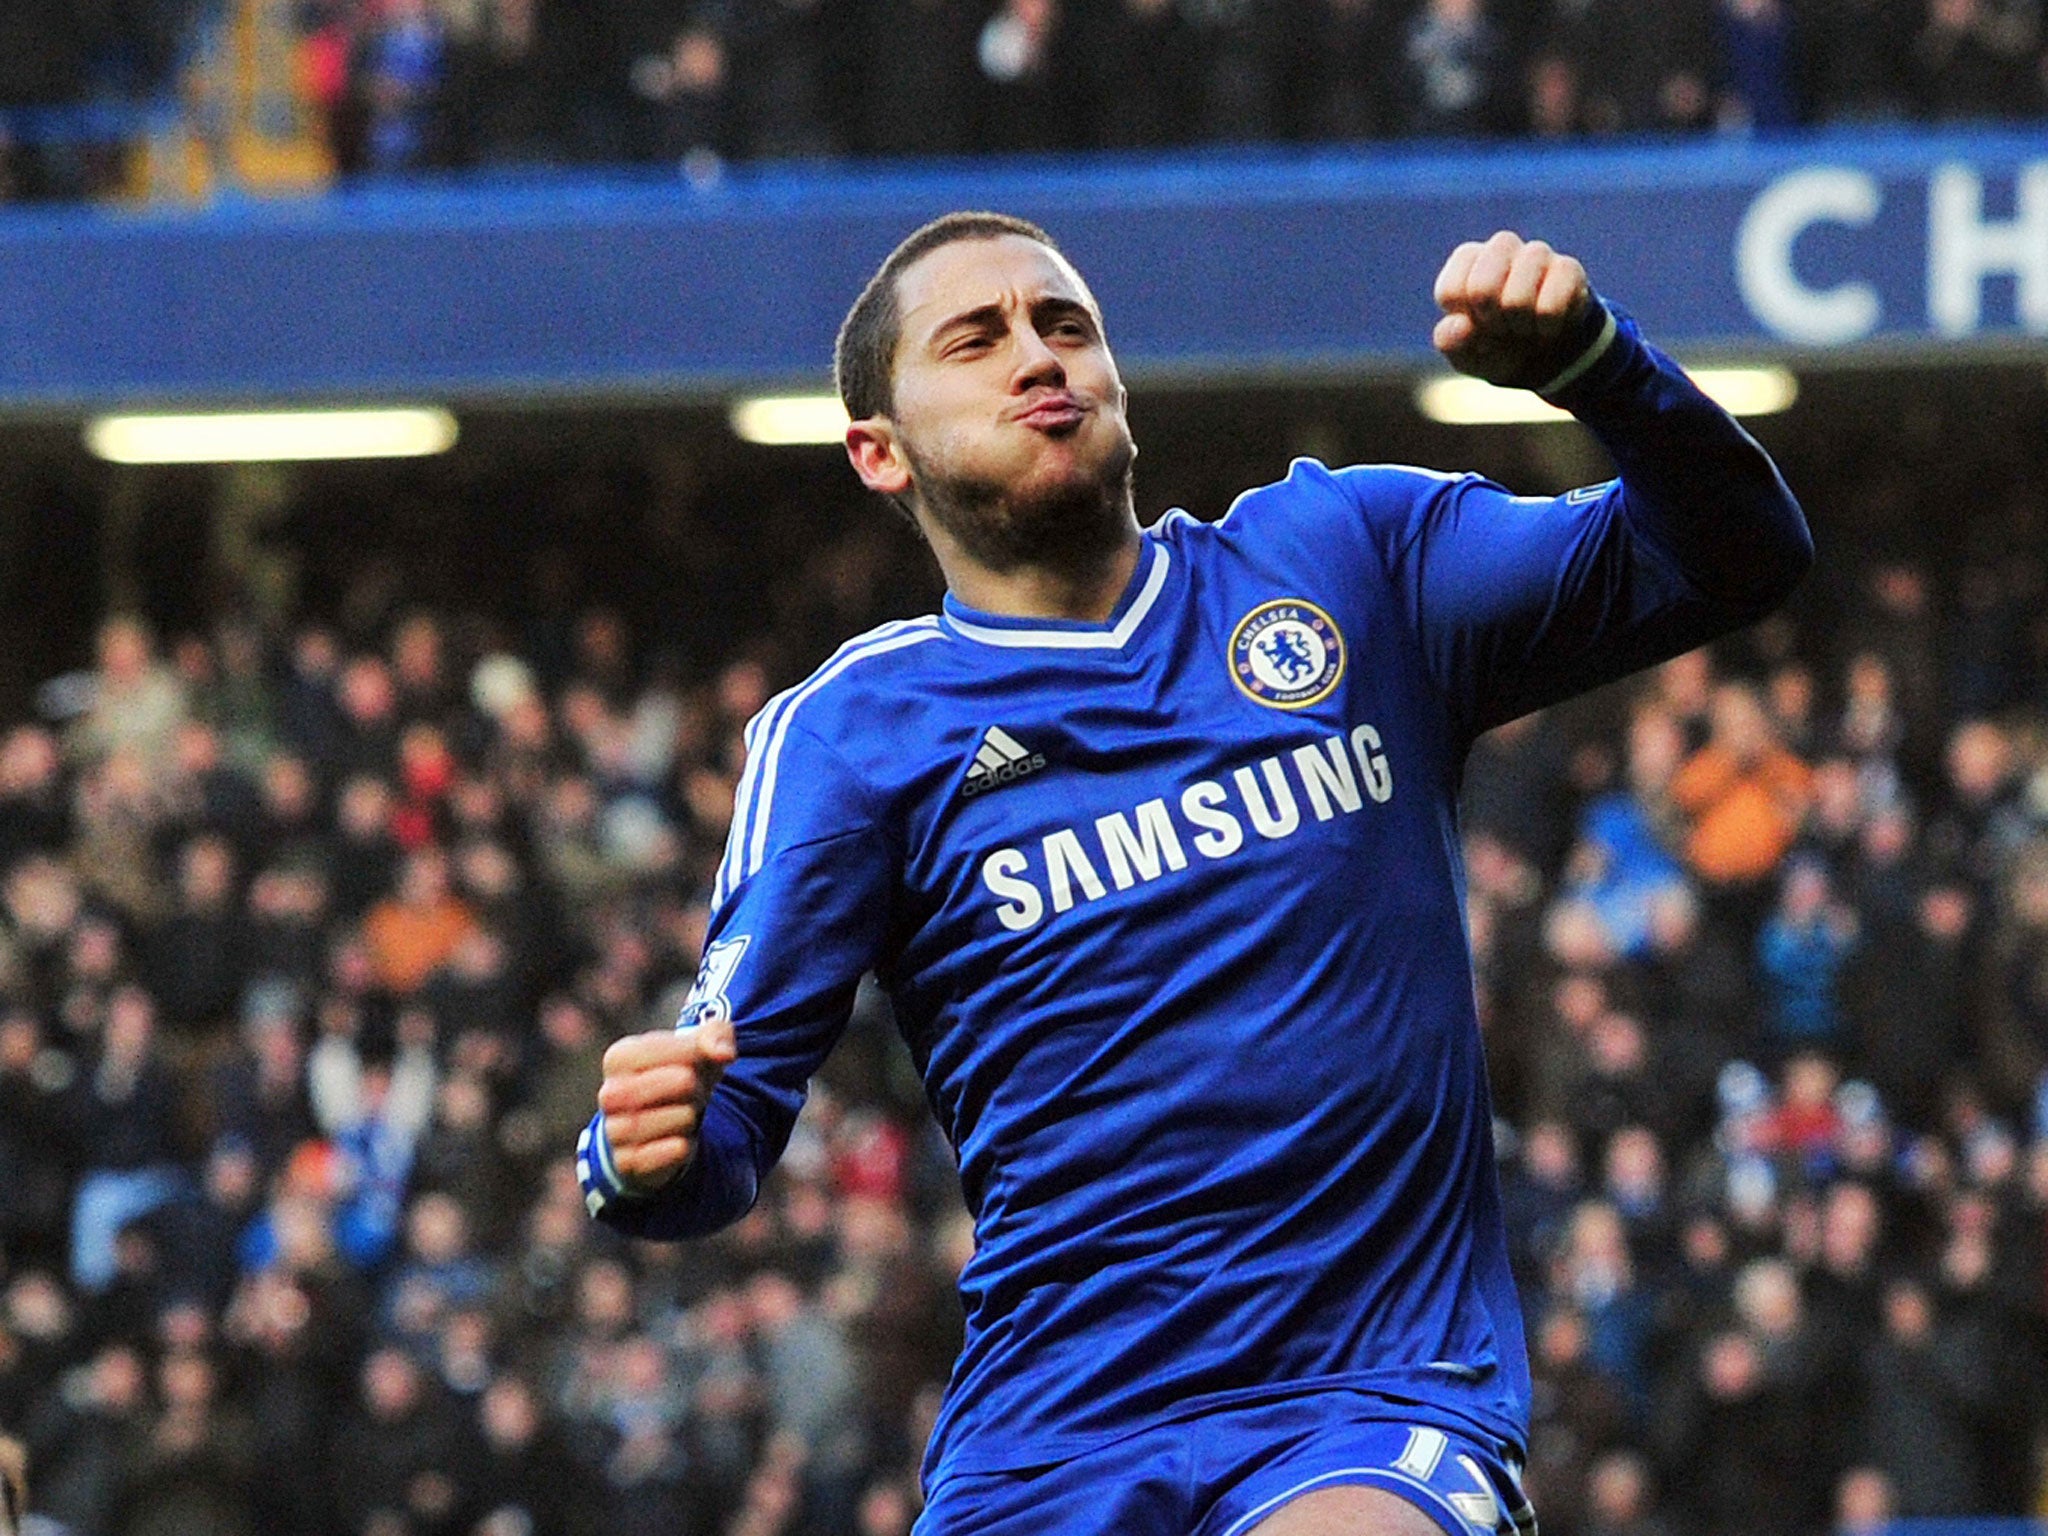 Eden Hazard has learnt to work for the team and seeks to dominate games, claims Jose Mourinho